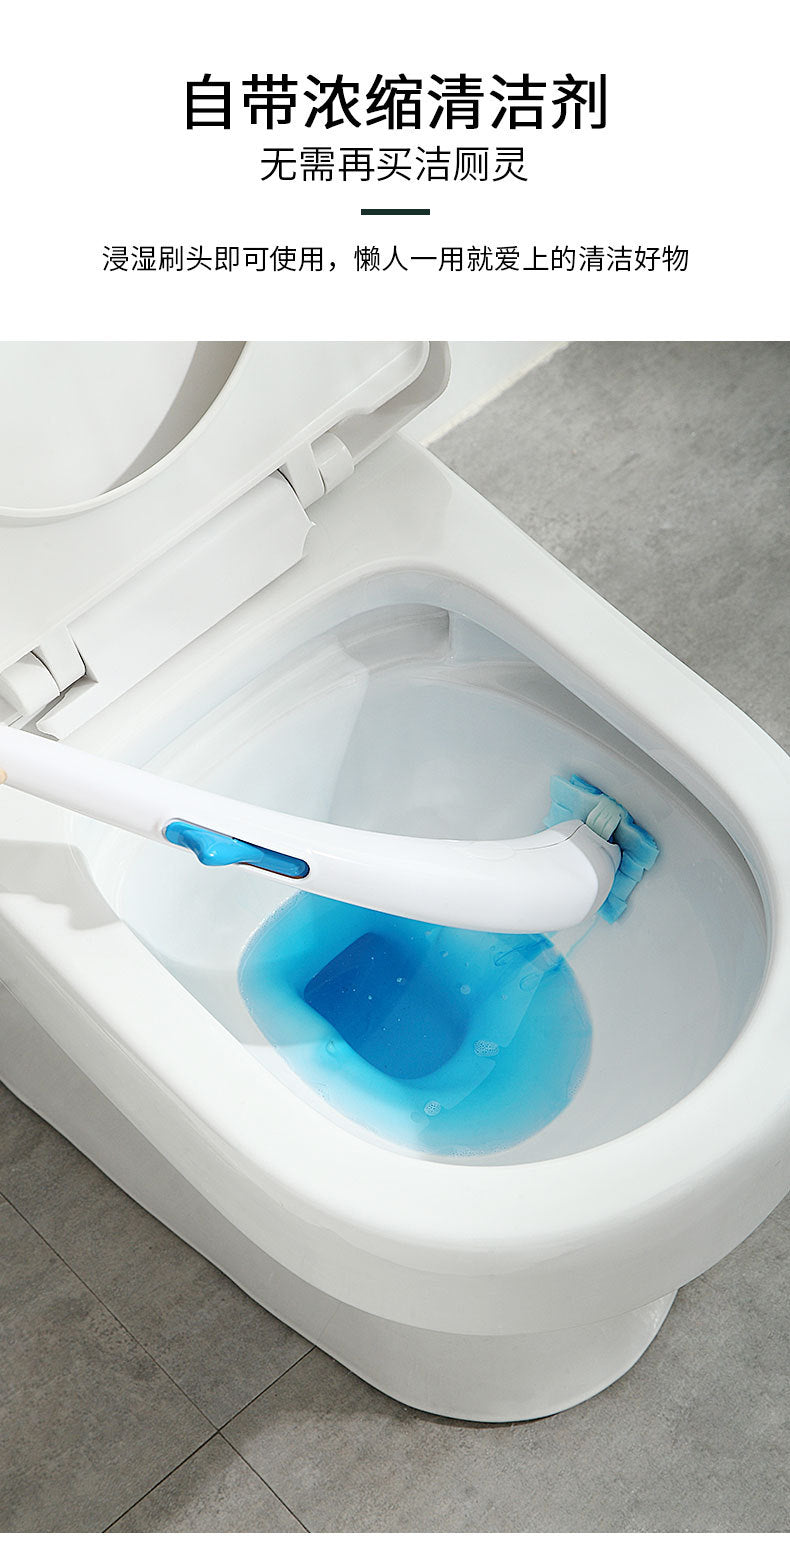 Disposable Toilet Brush Set With Detergent